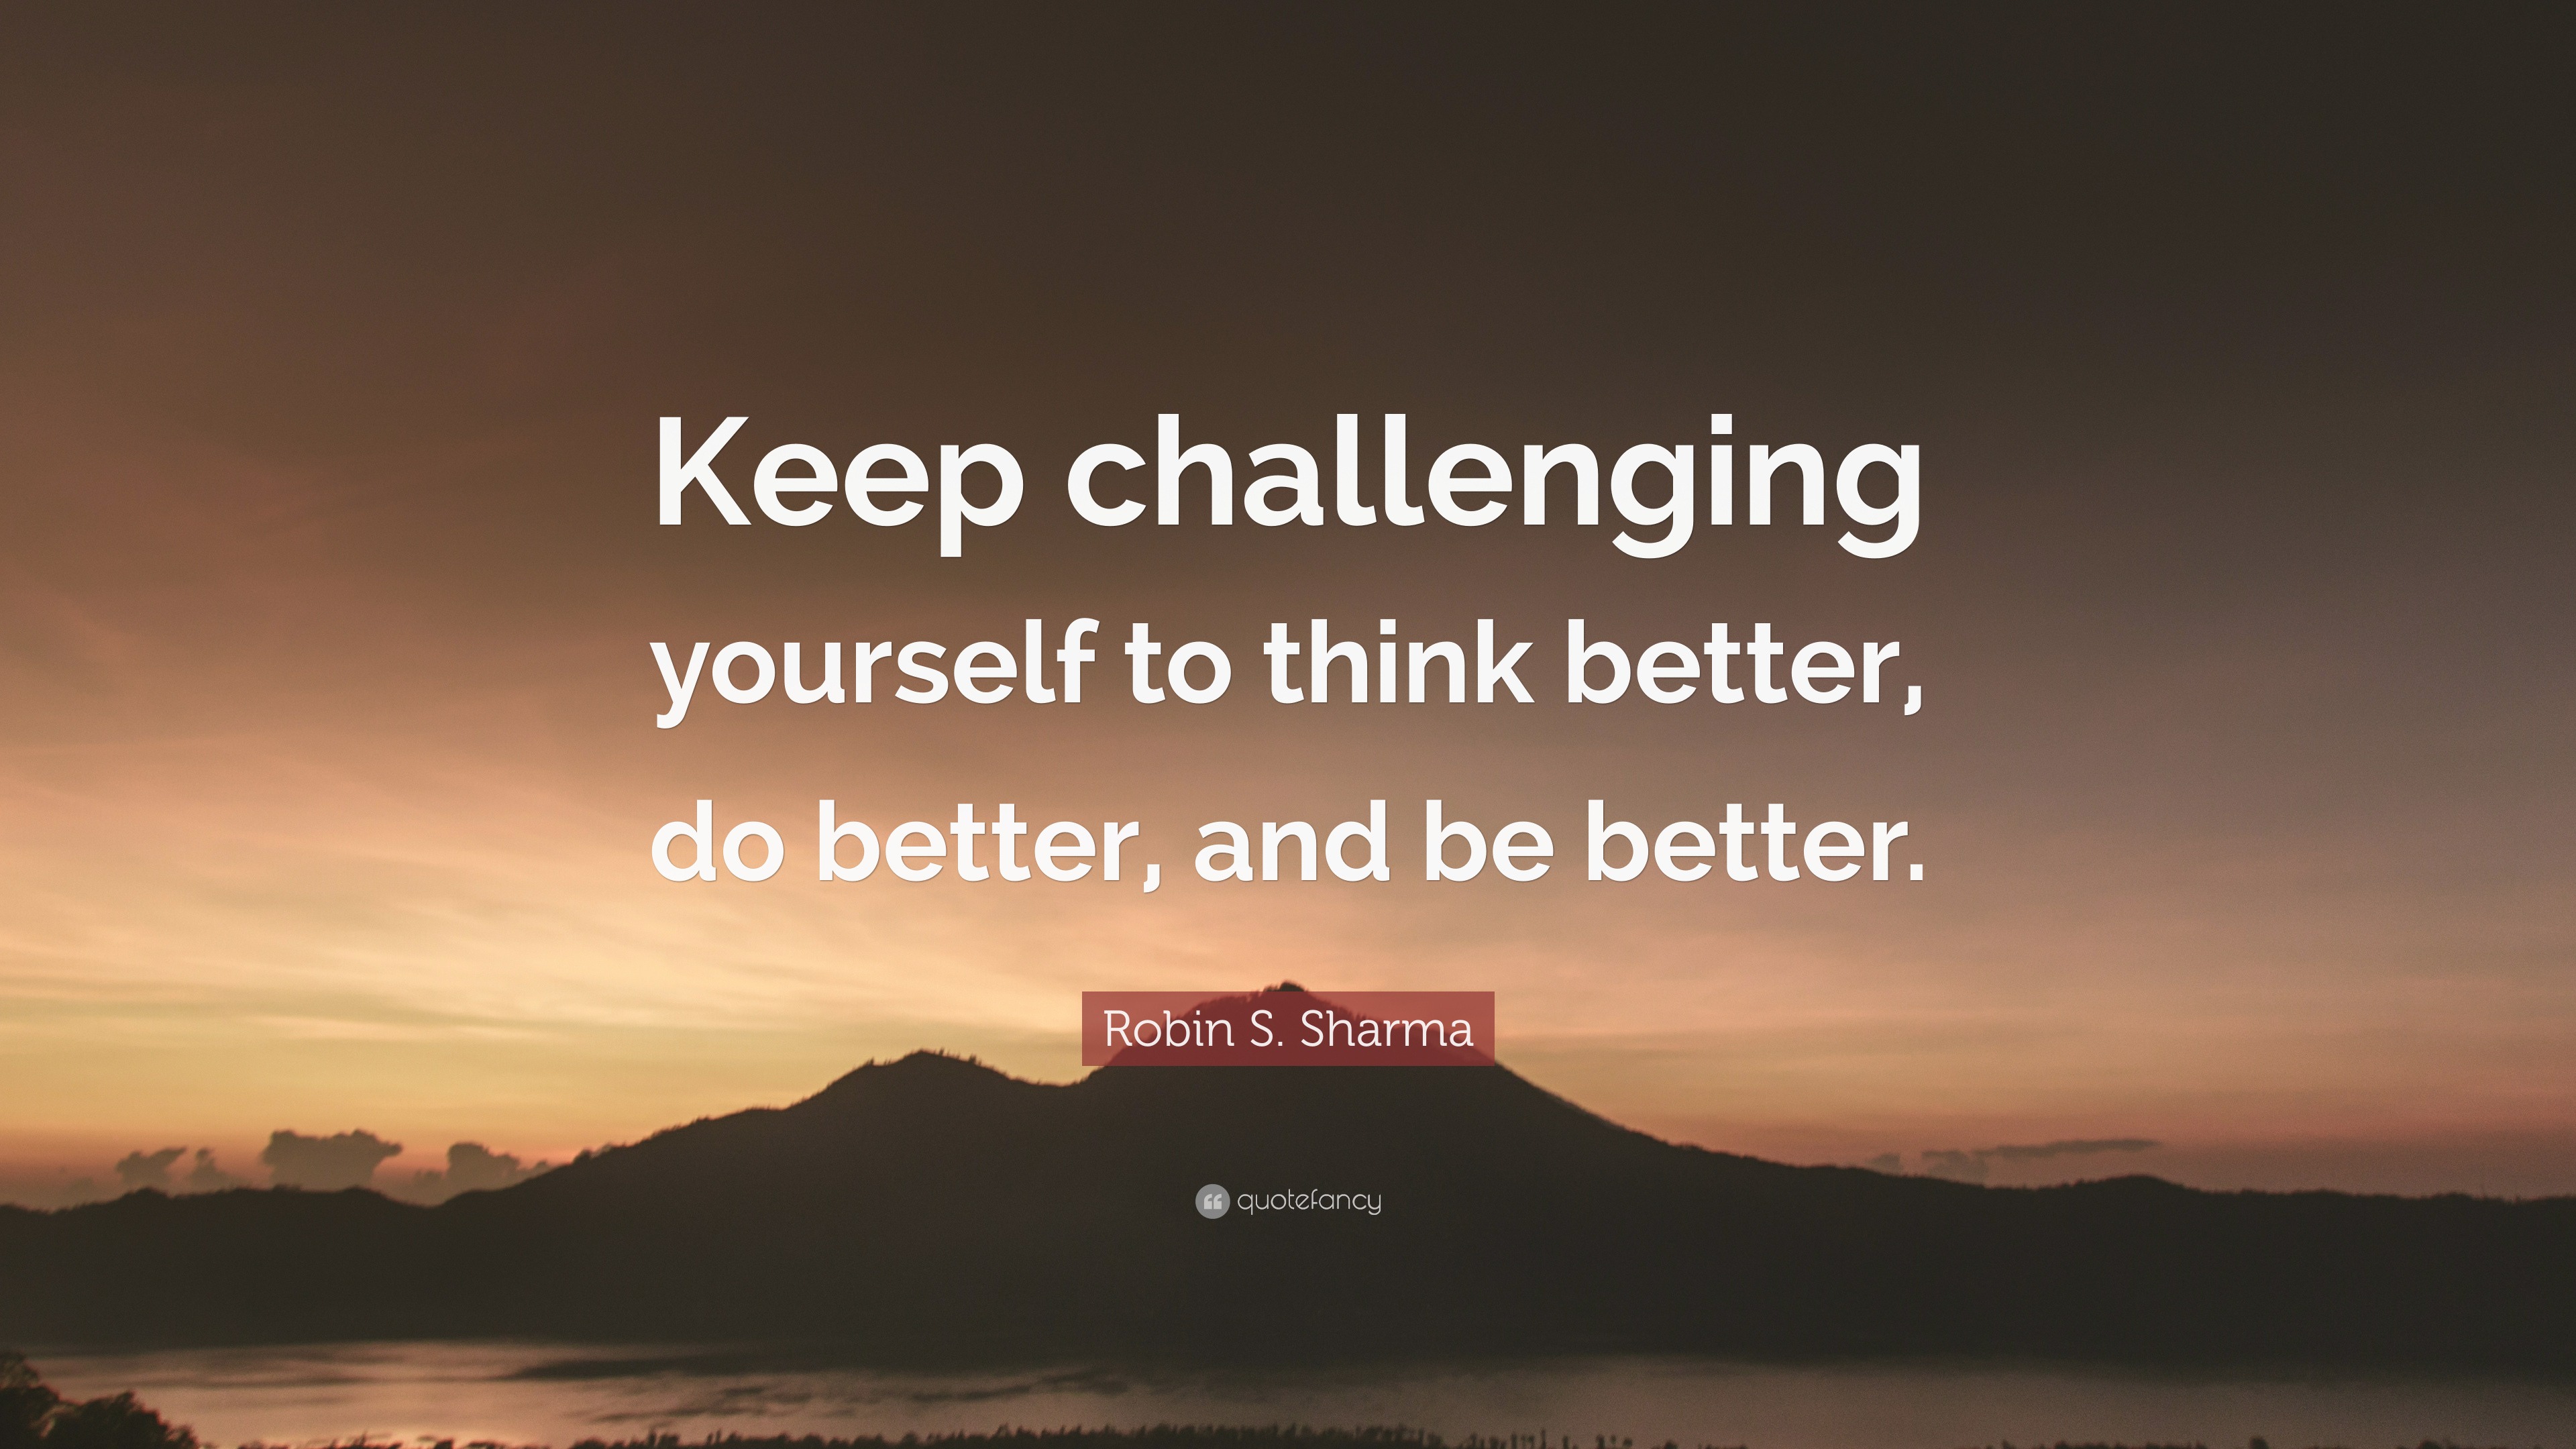 Robin S. Sharma Quote: “Keep challenging yourself to think better, do